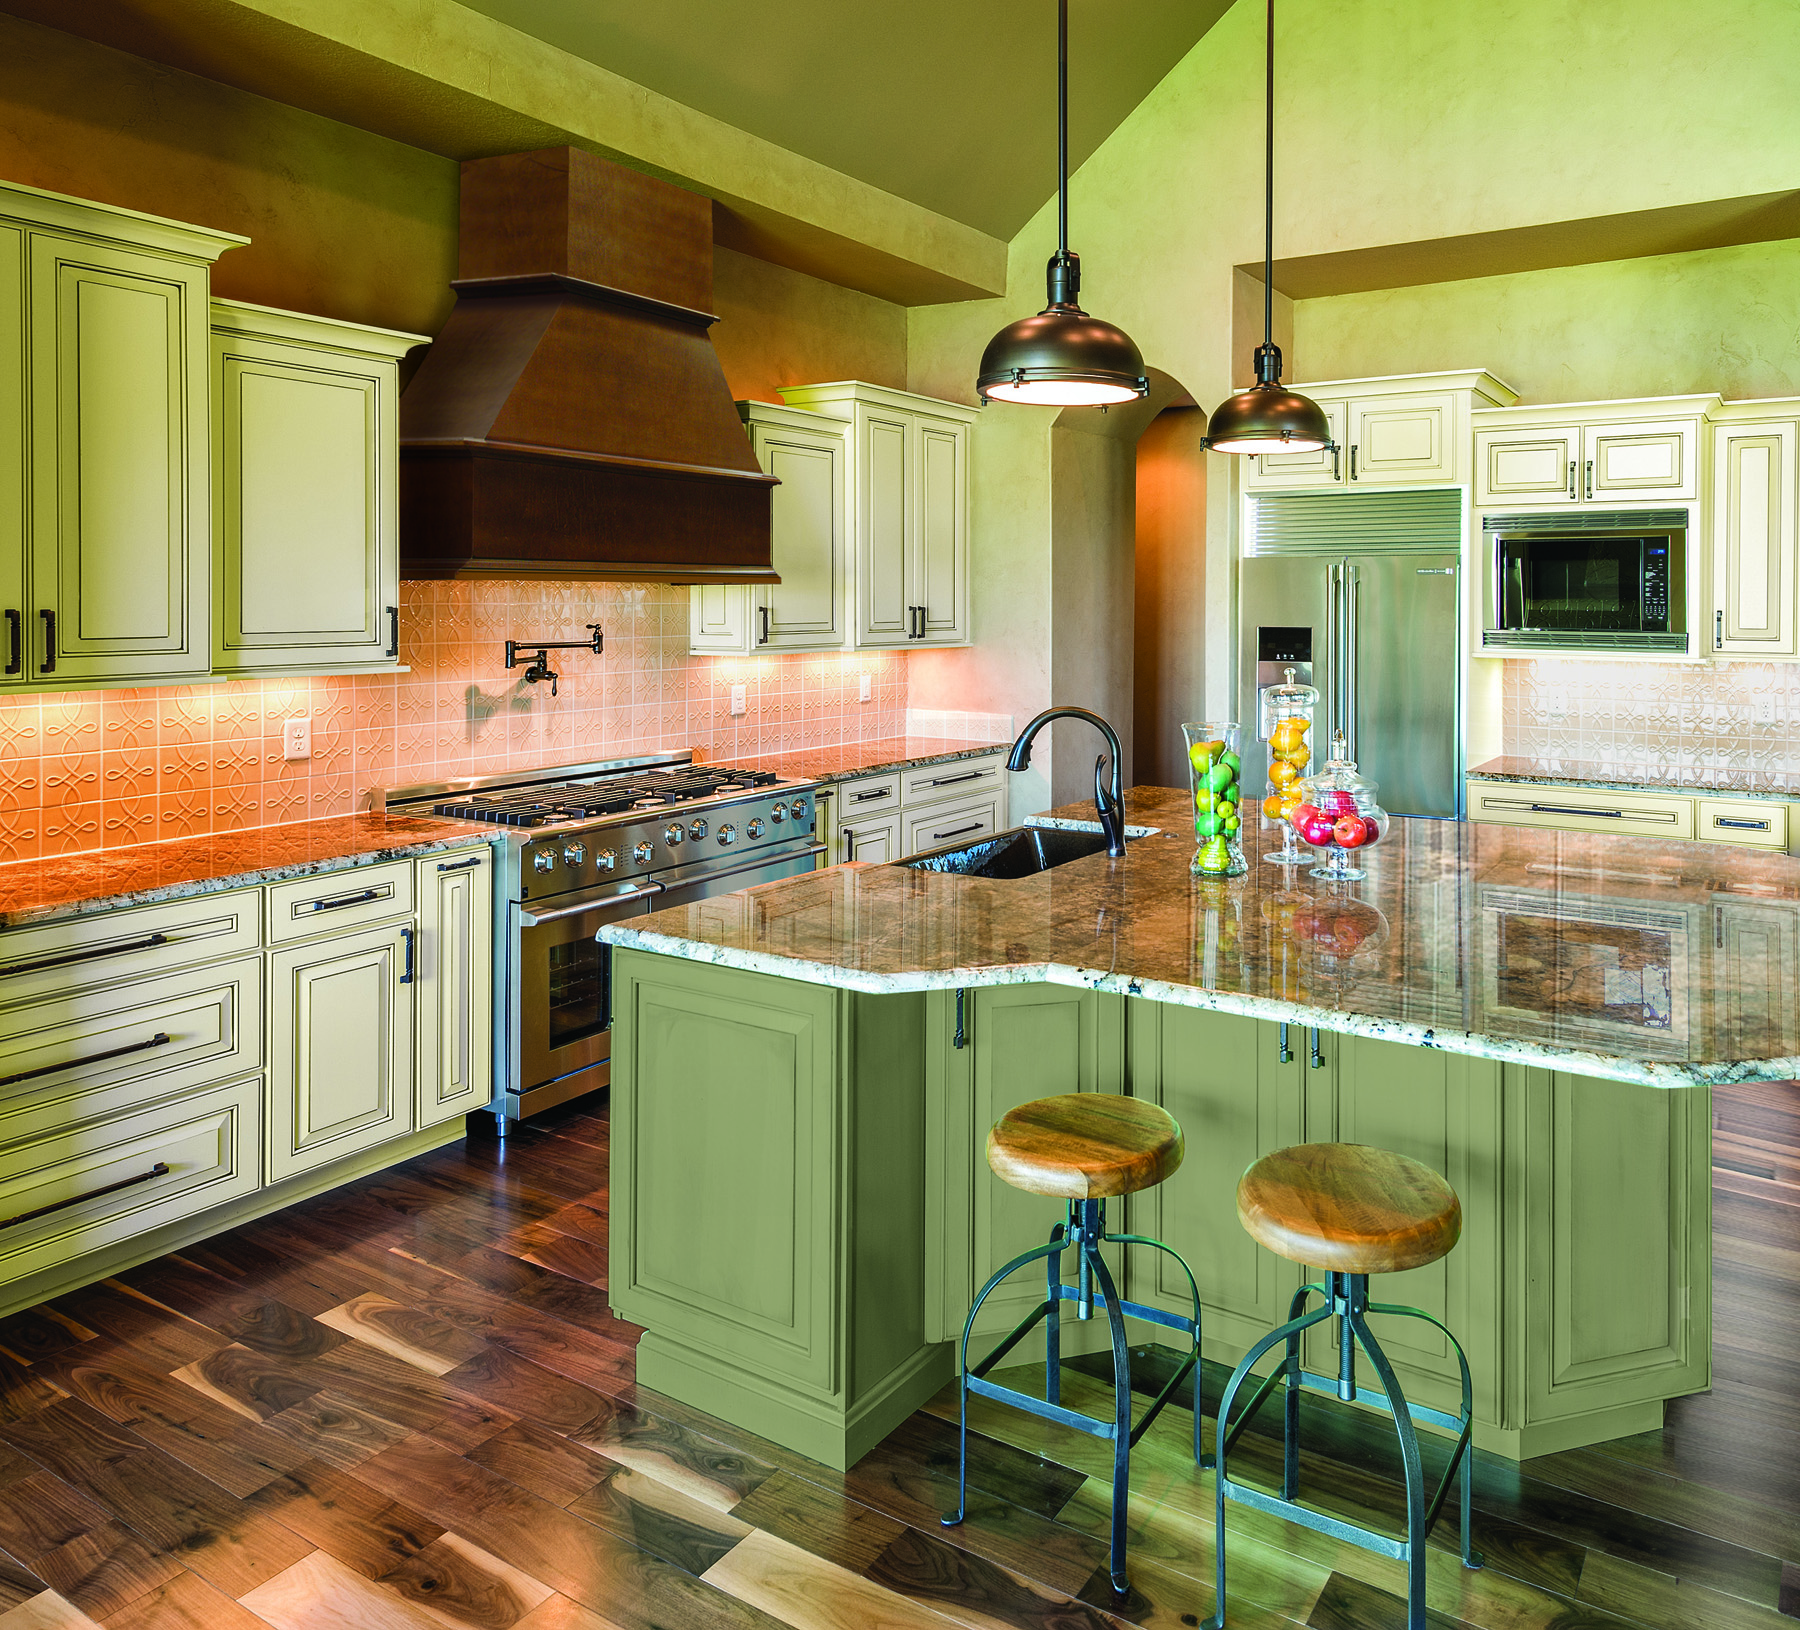 New Paint Colors Bring HighFashion Home to Kitchen